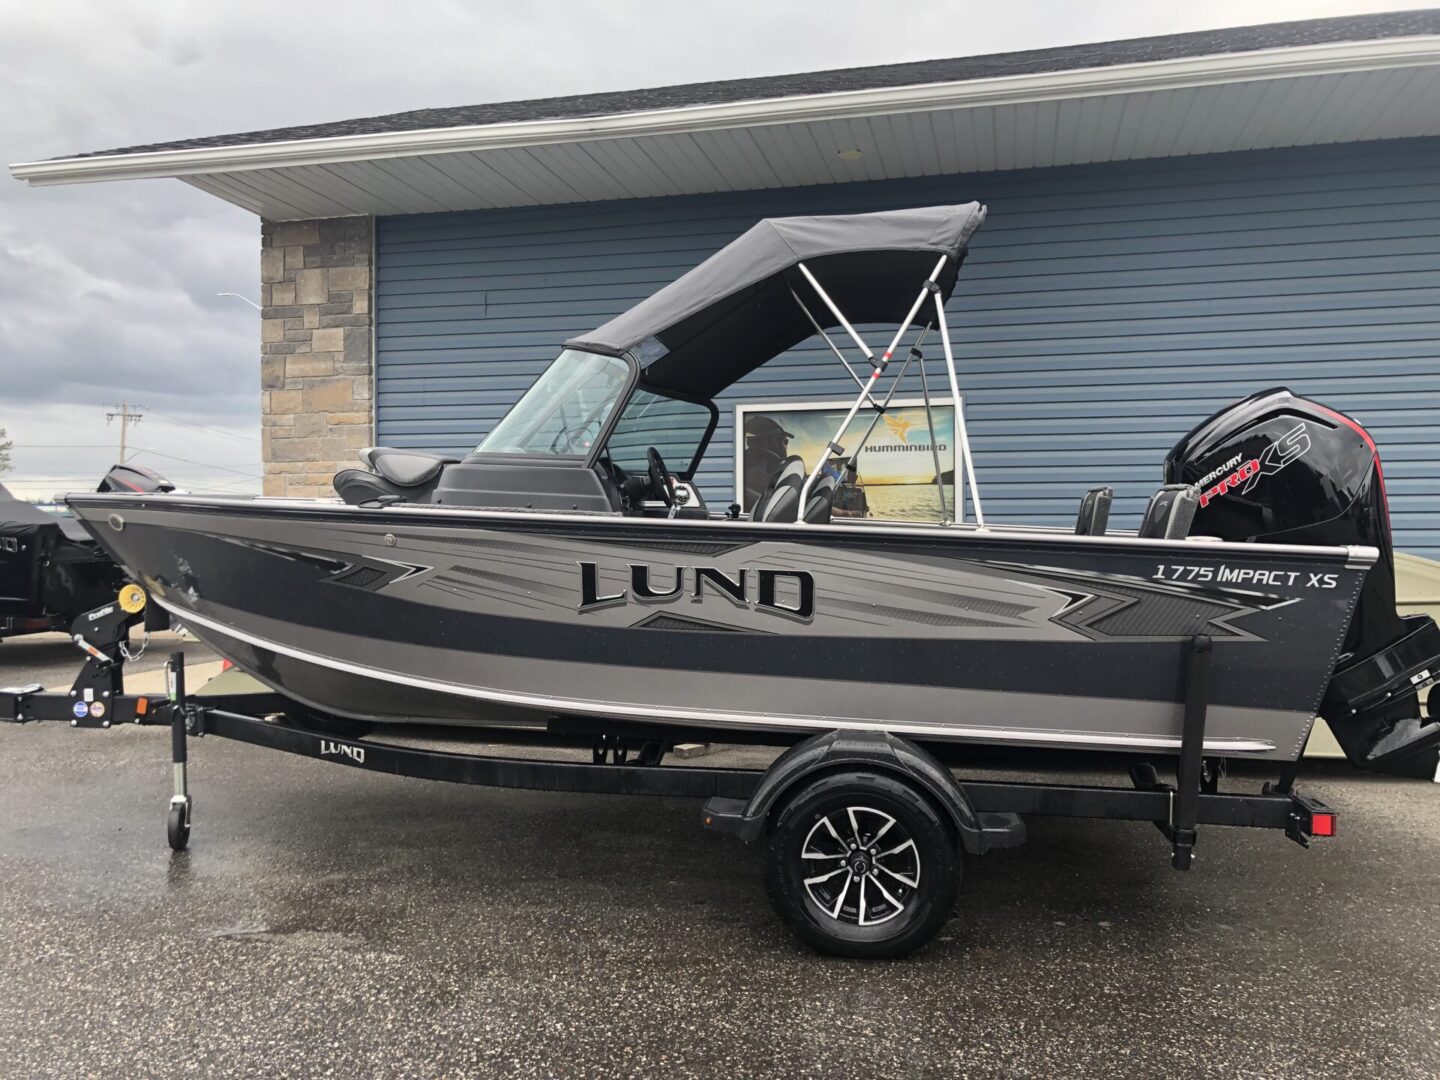 Lund gray and black boat with cover